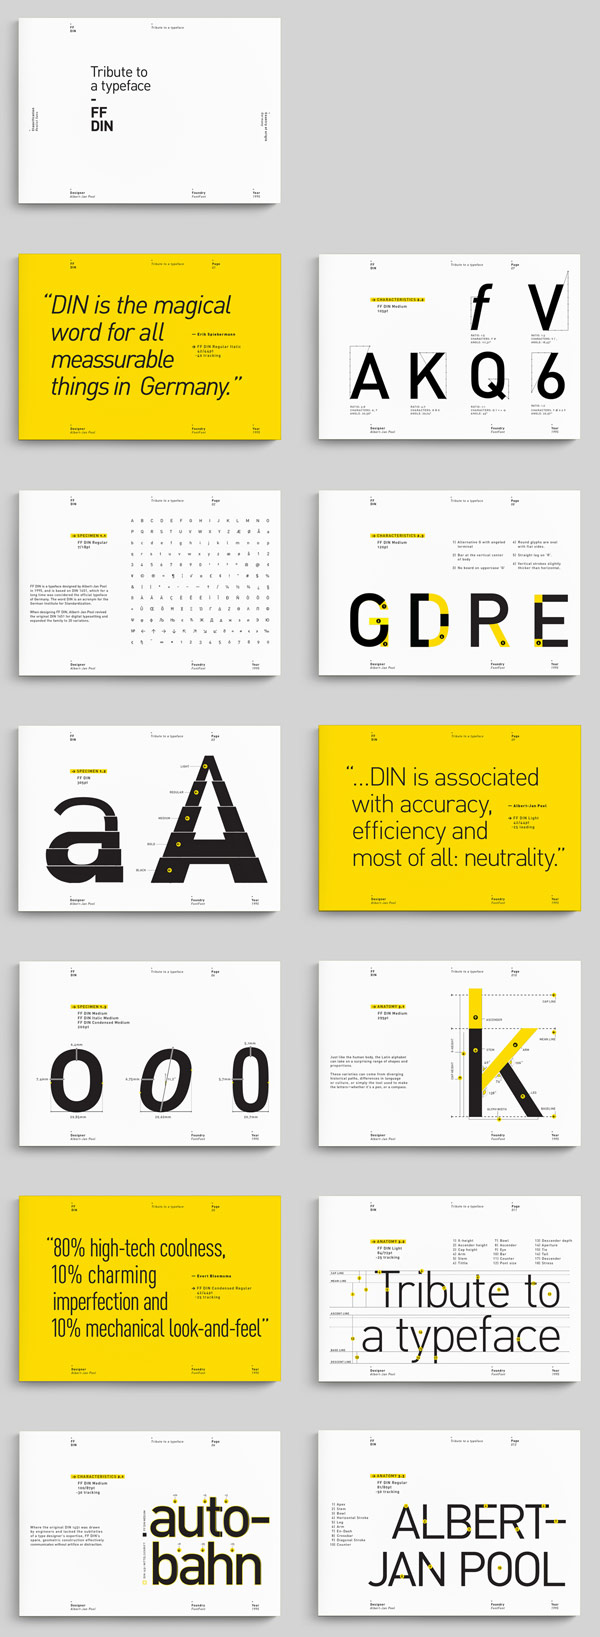 This card set is a tribute to the excellent font design of the FF DIN typeface.